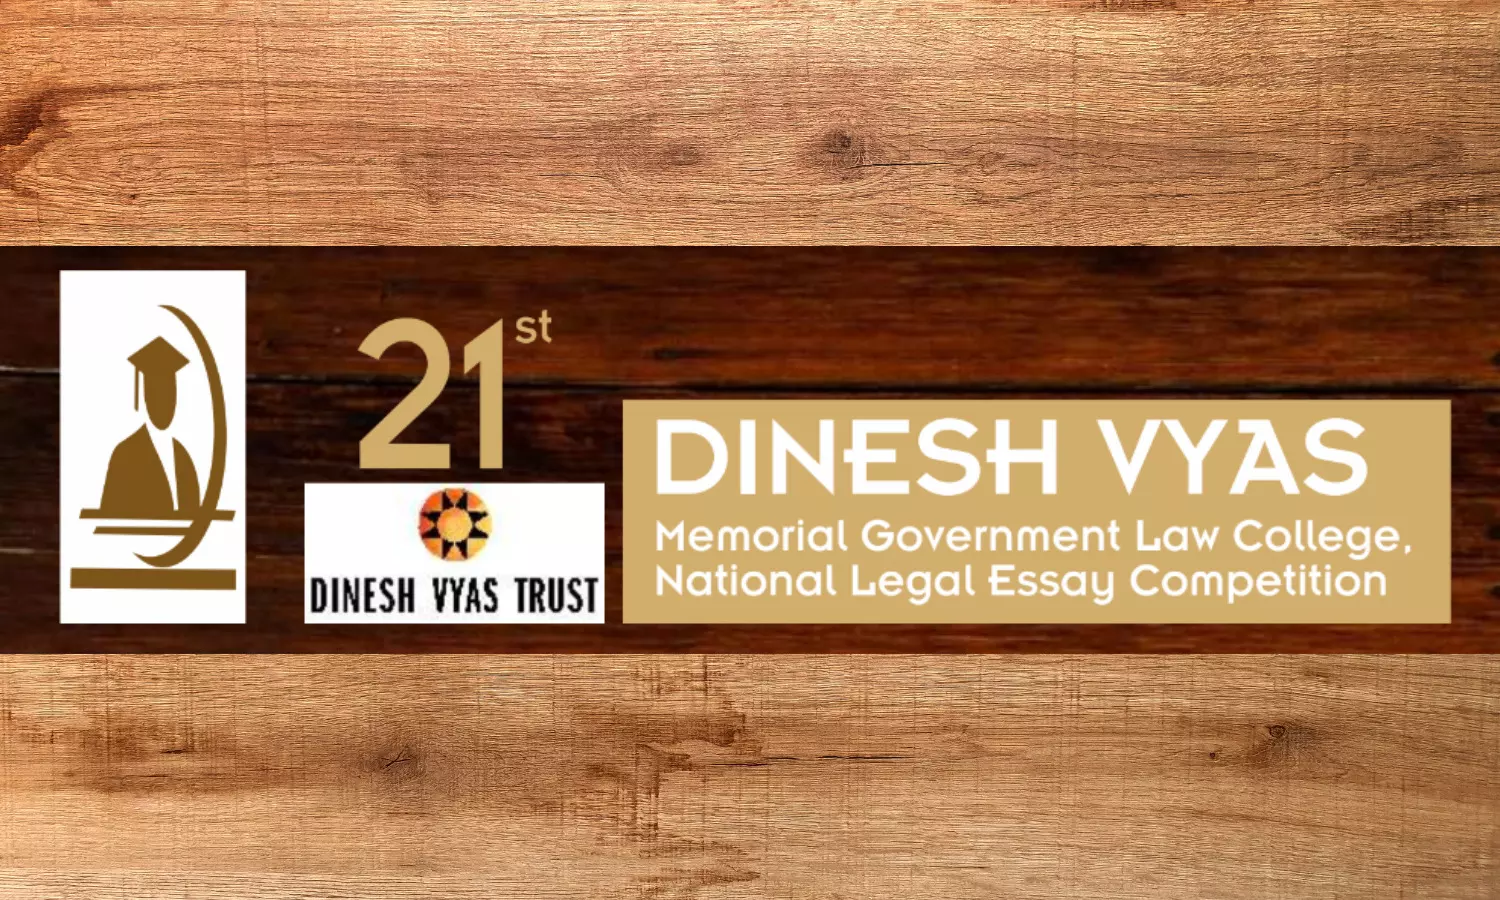 21st Dinesh Vyas Memorial Government Law College National Legal Essay Competition | Government Law College, Mumbai